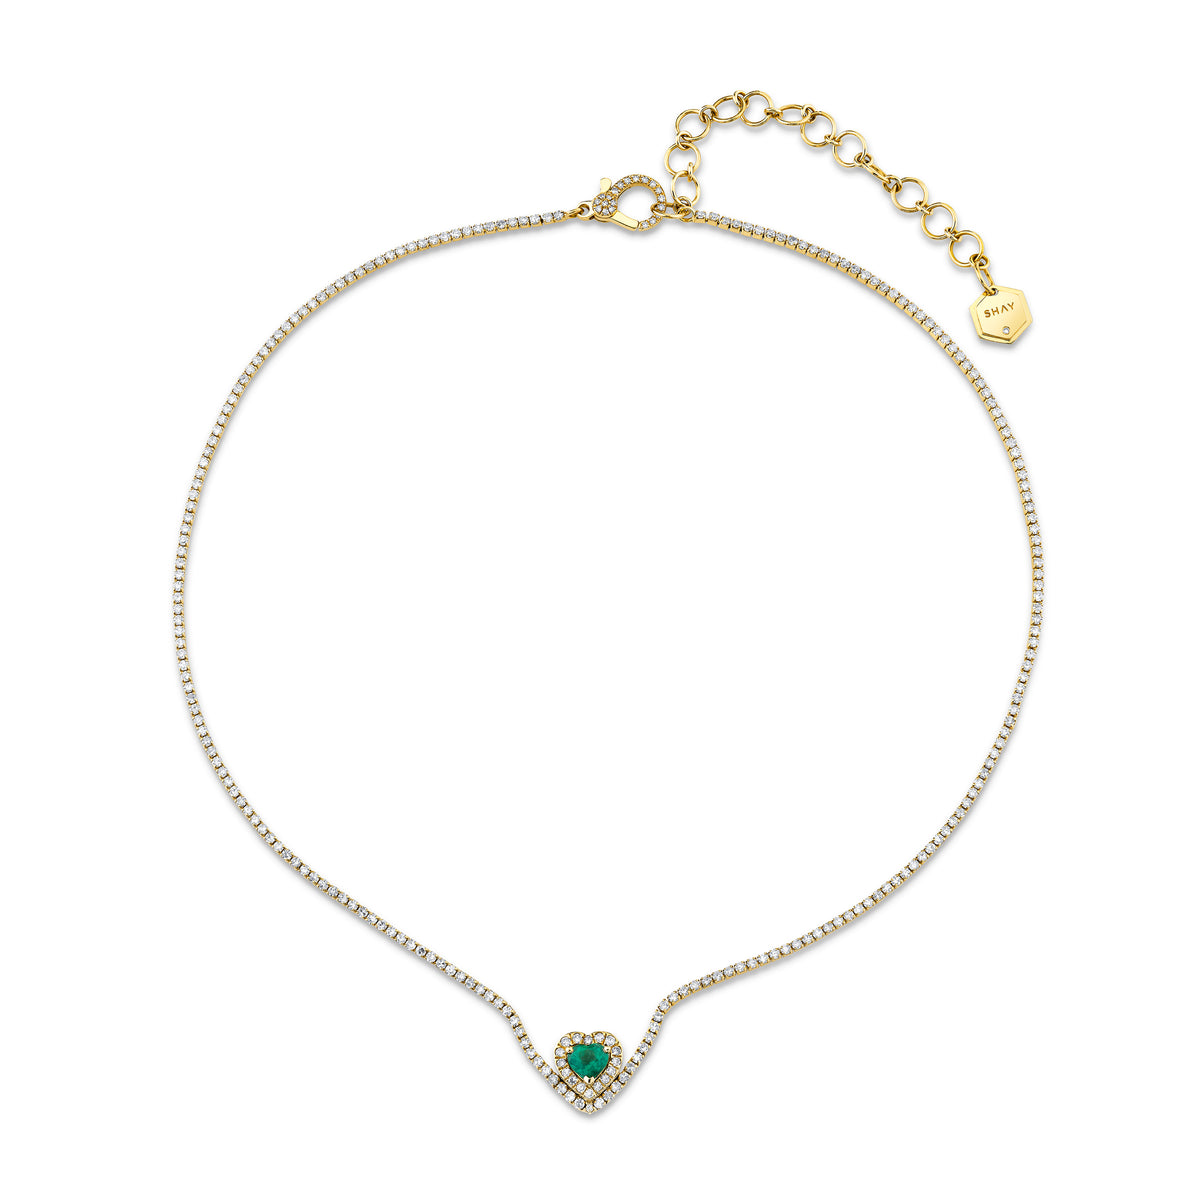 EMERALD & DIAMOND FLOATING HEART PAVE THREAD NECKLACE